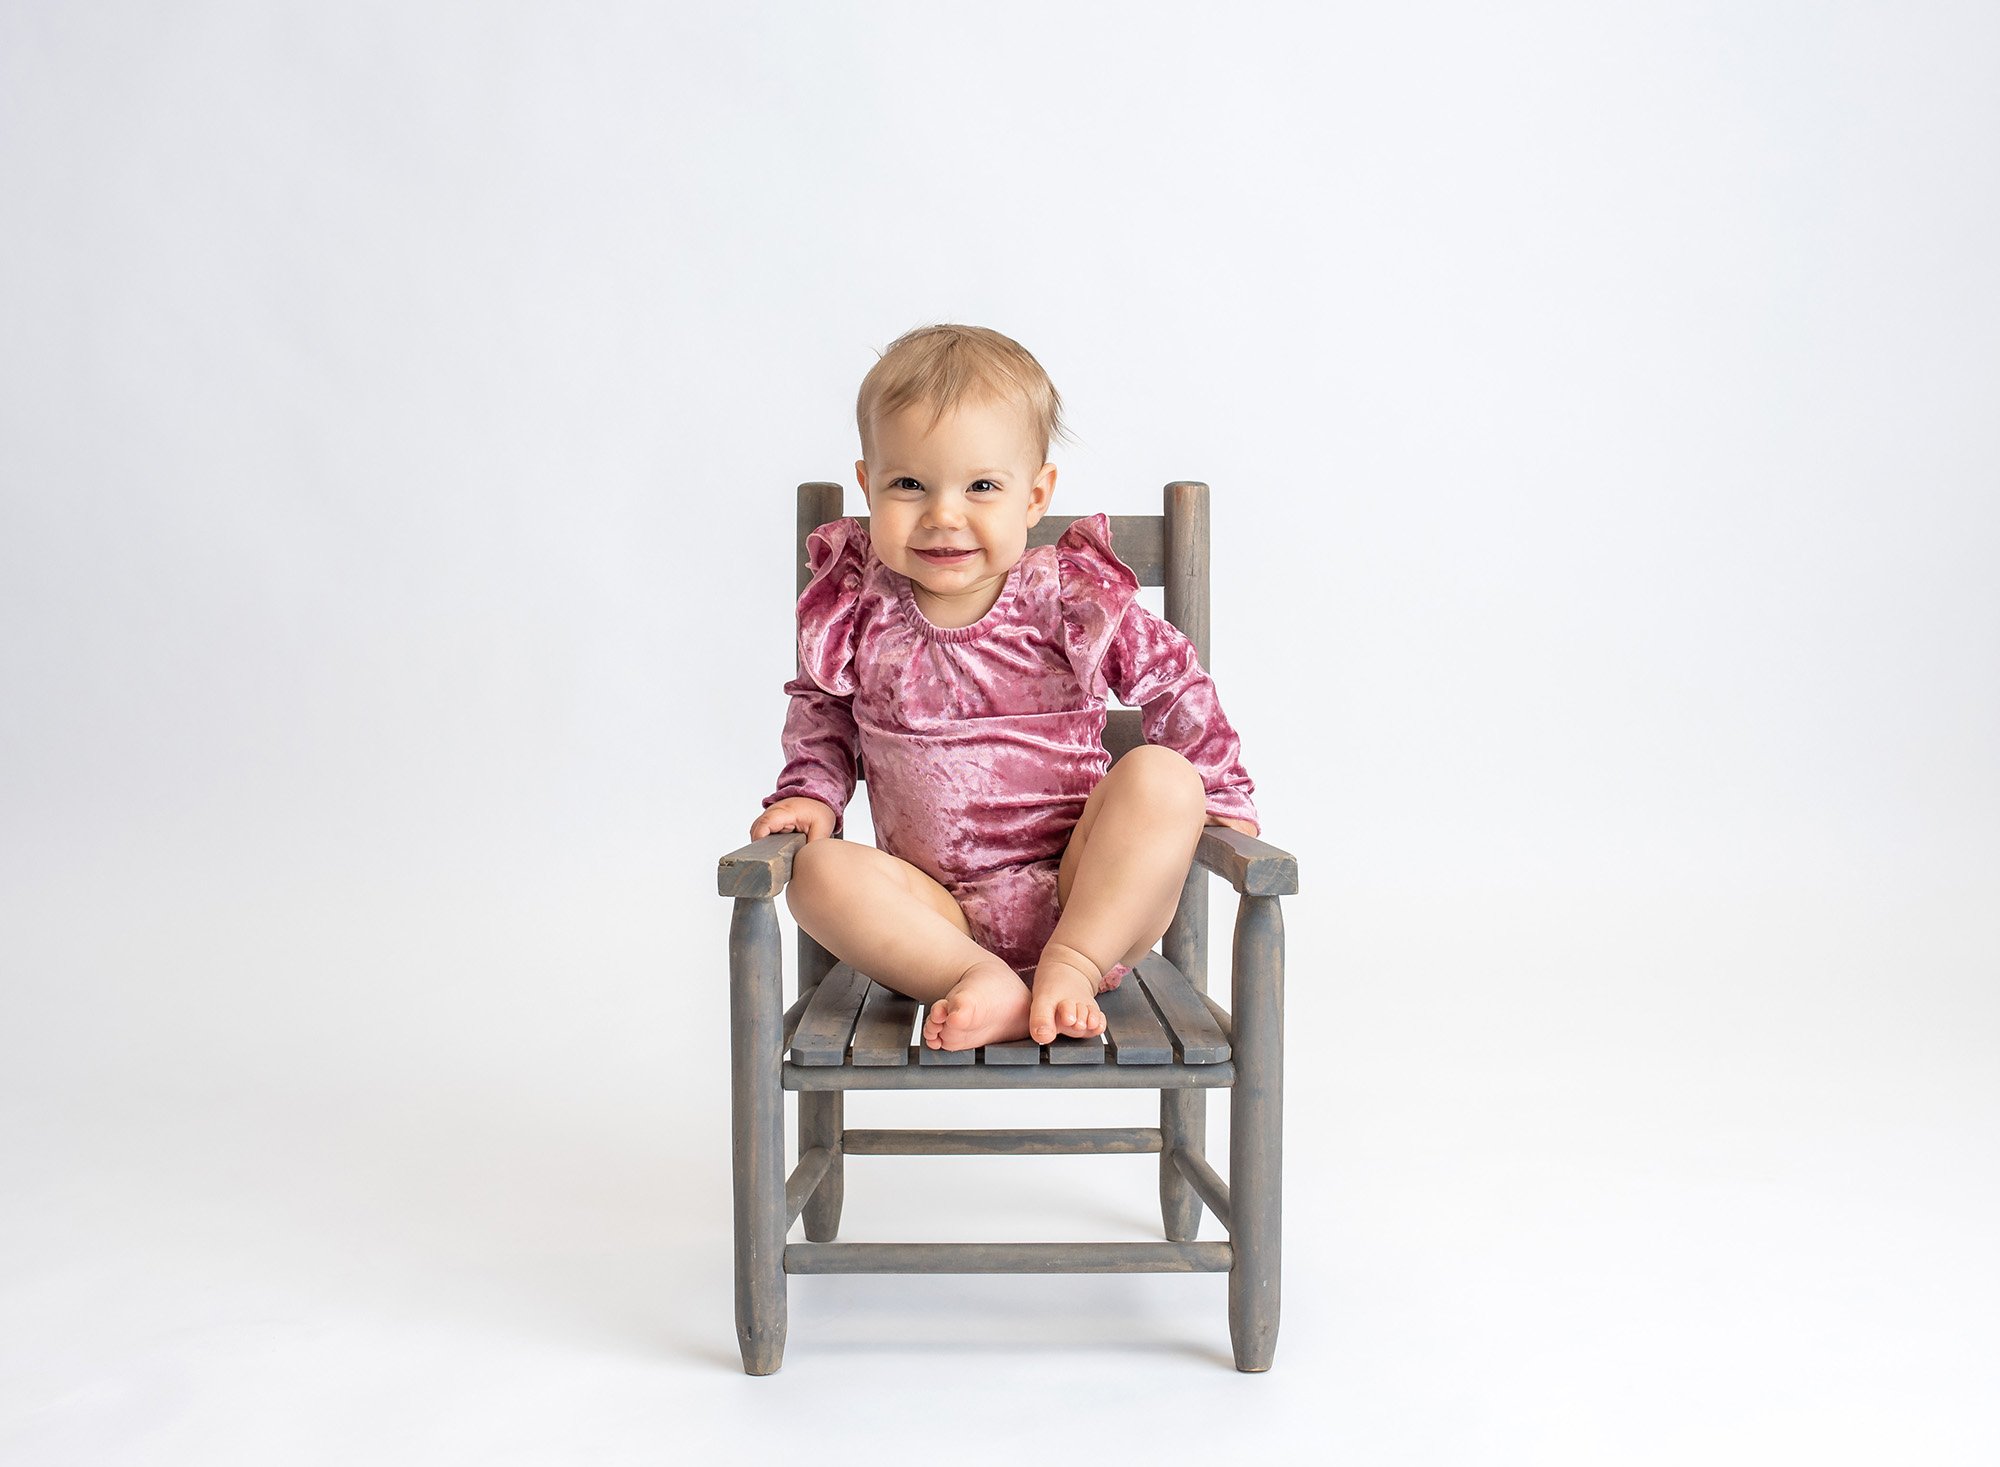 blonde one year old girl wearing pink velvet body suit sitting on rustic chair with white backdrop